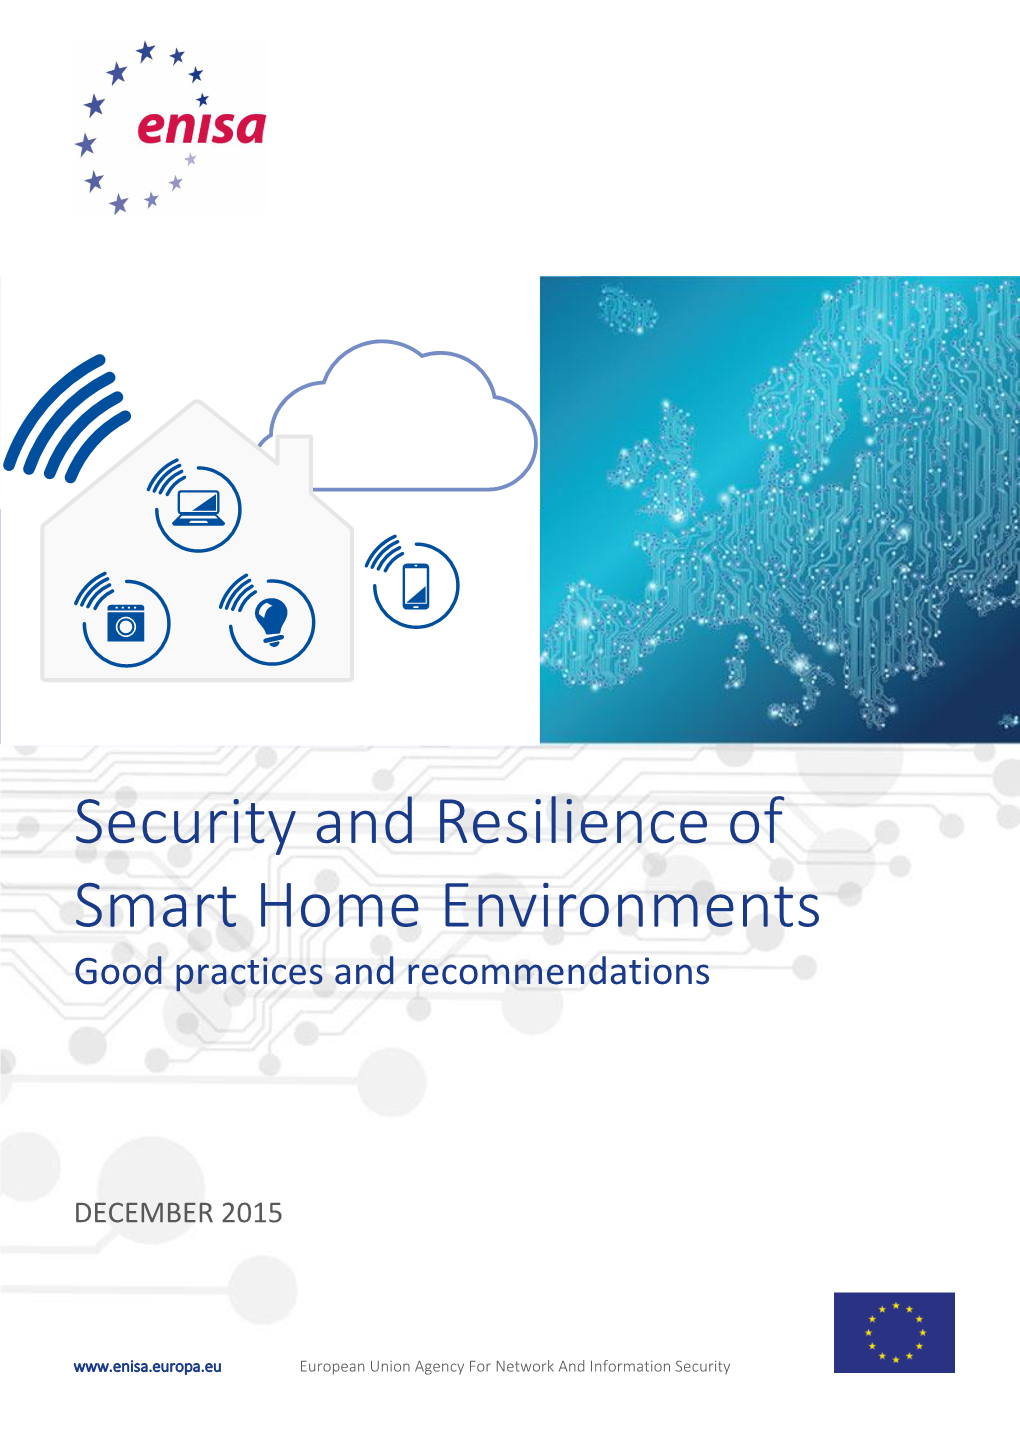 Security and Resilience of Smart Home Environments Good Practices and Recommendations